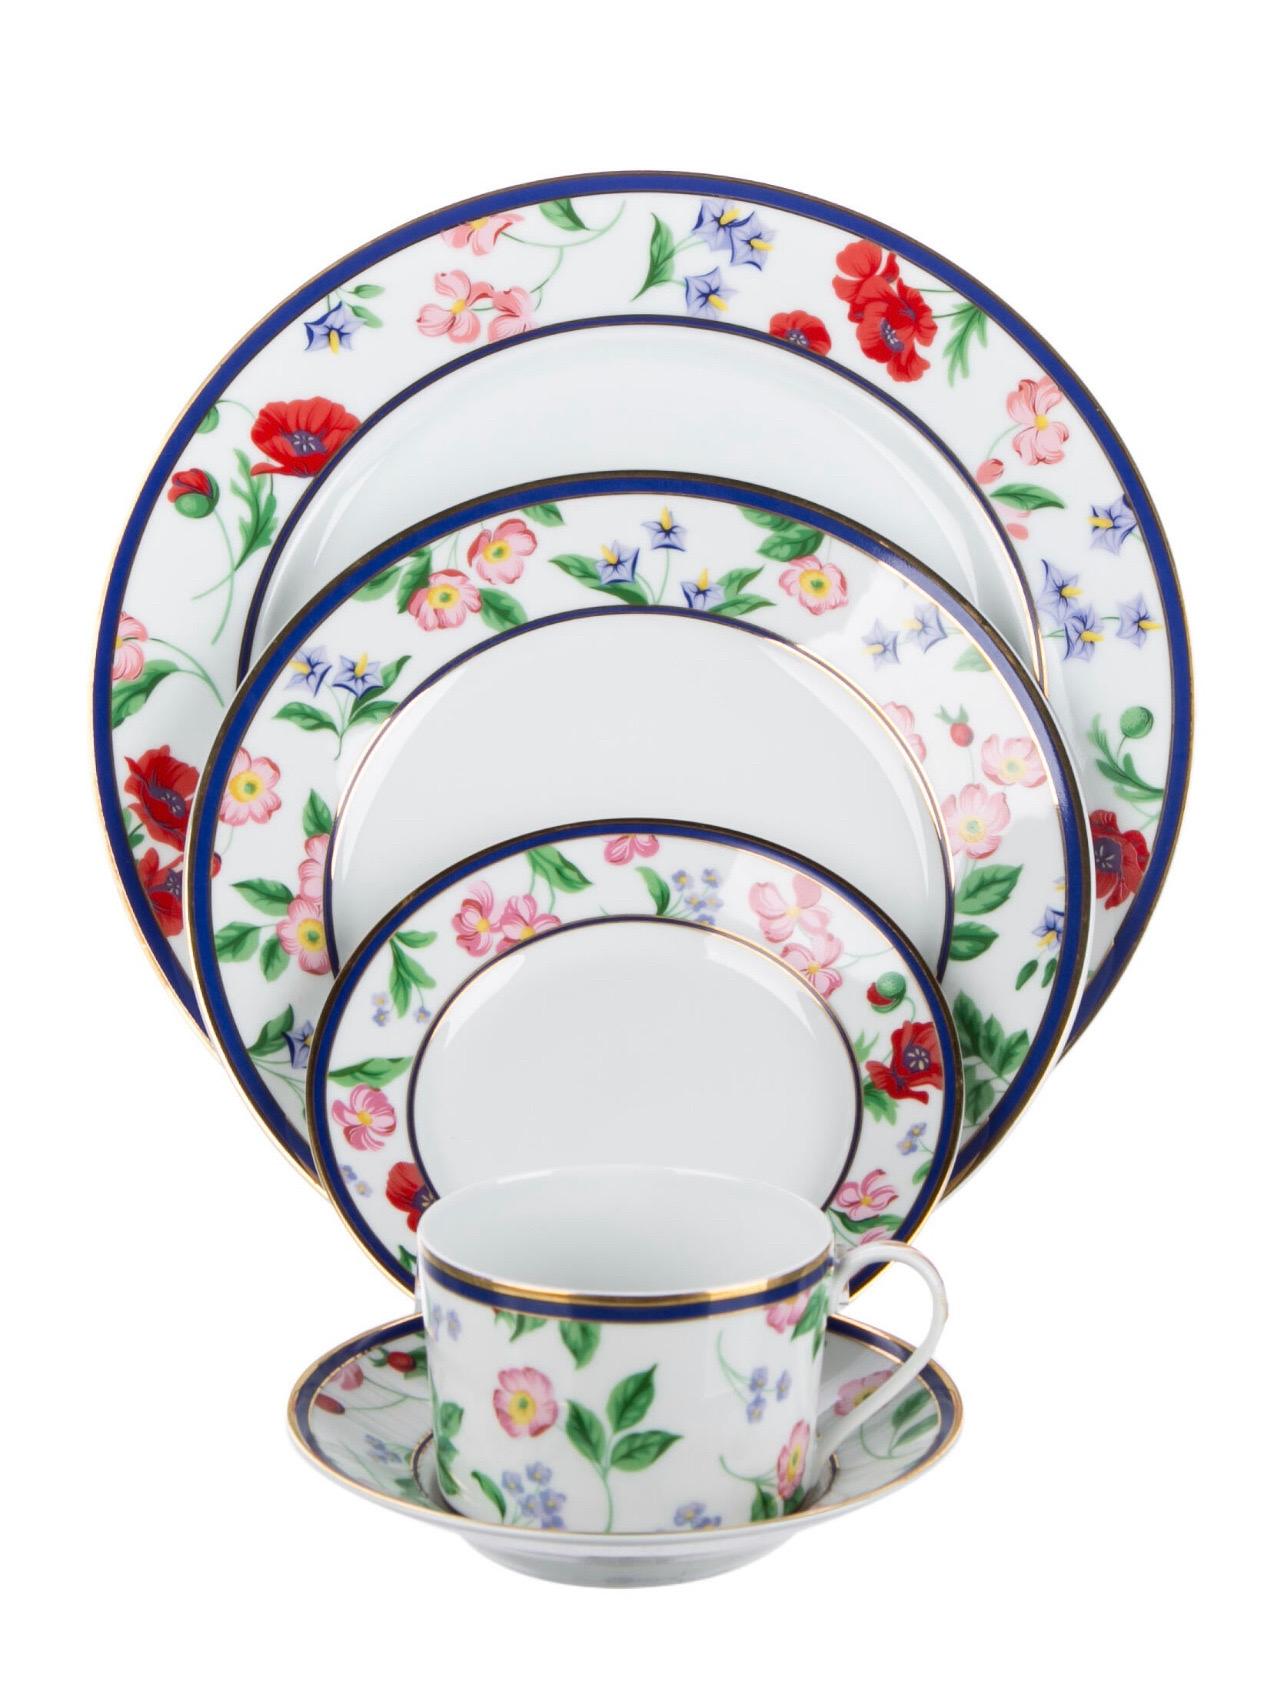 A 102-piece dinnerware set by Limoges porcelain for Tiffany & Co. in the American Garden pattern.

Features floral motif throughout, gilt trim at rim and brand stamp at undersides. 

Made in France.

Includes the following 102 pieces:
12 dinner